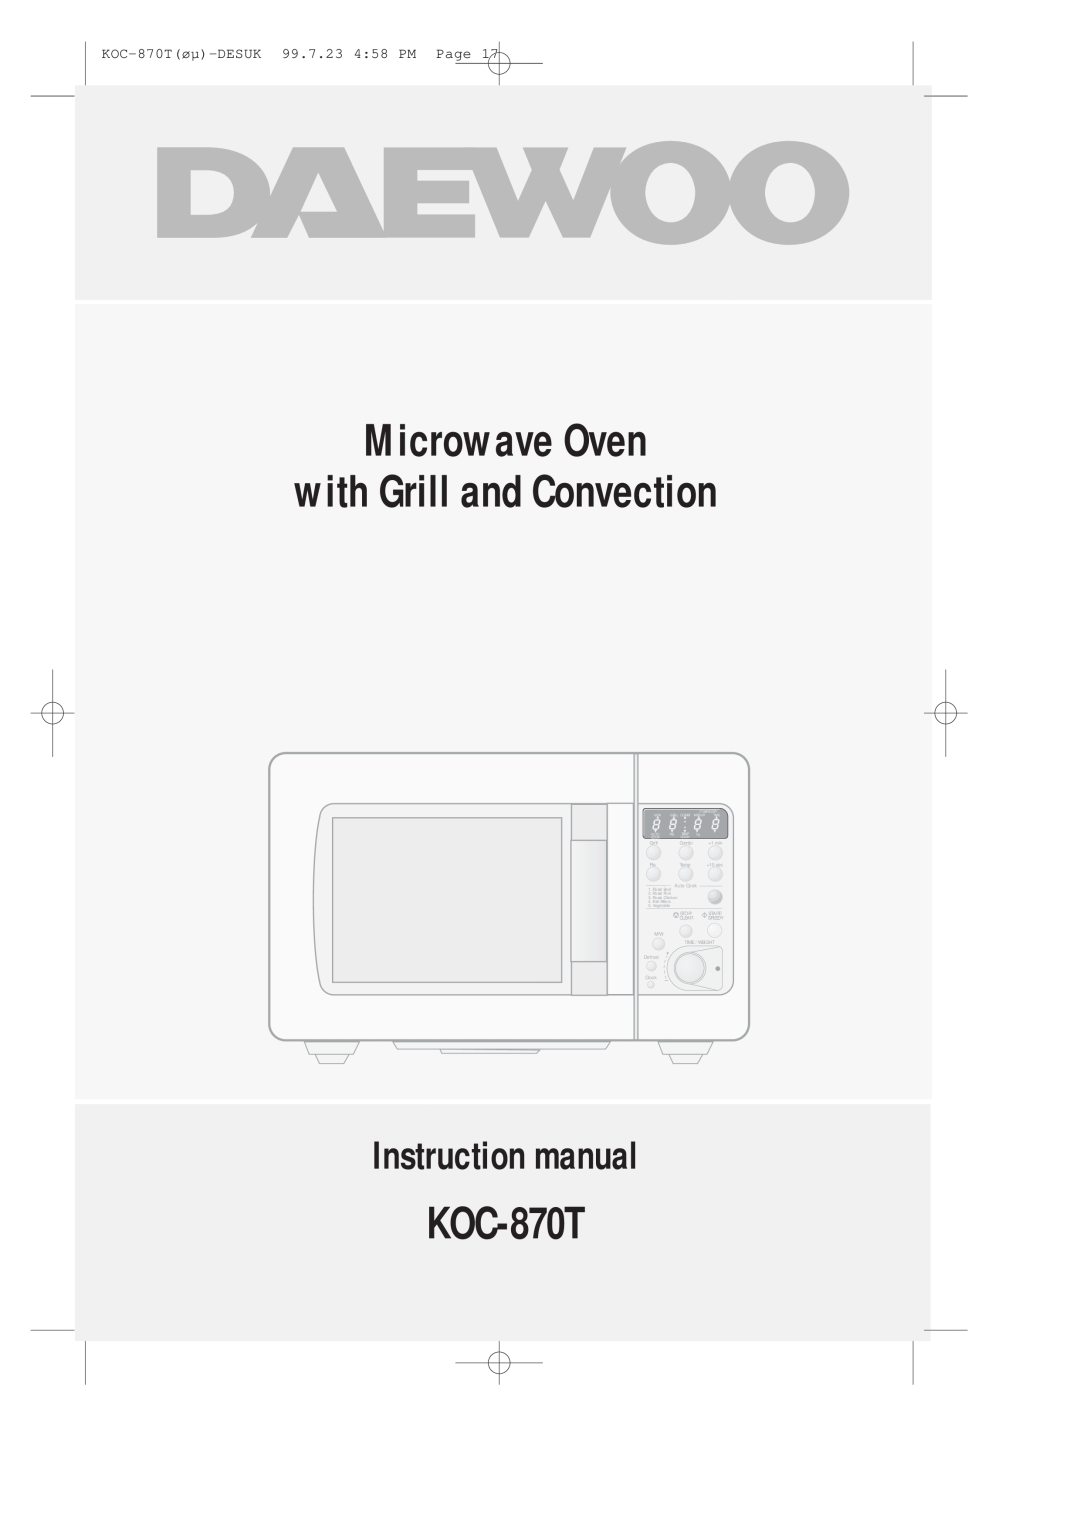 Daewoo KOC-870T instruction manual Microwave Oven with Grill and Convection, Instruction manual, Combi, +1 min, Auto Cook 